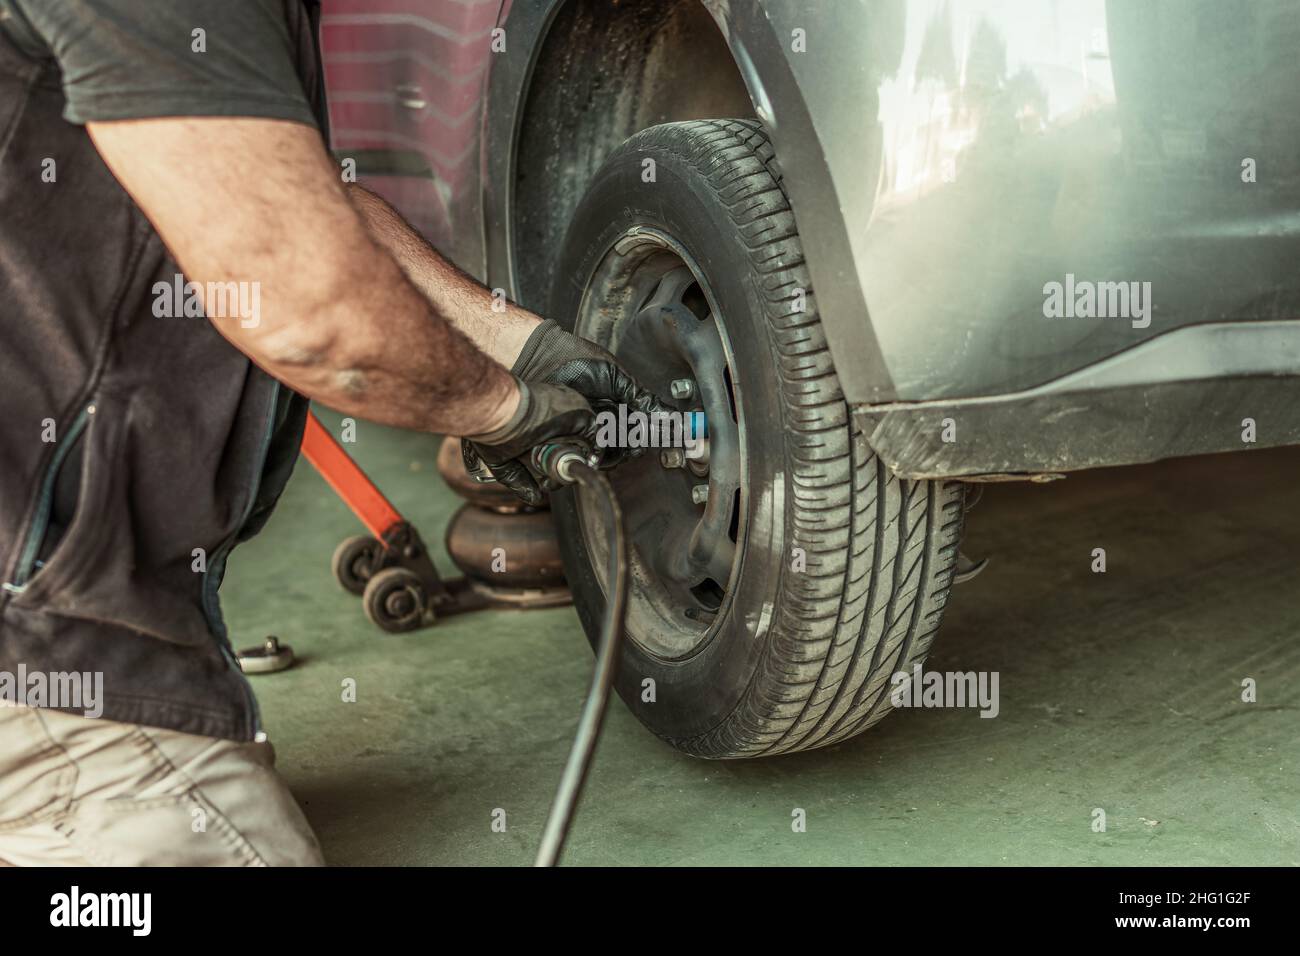 Mechanic using an electric screwdriver to remove a wheel in a garage Stock Photo